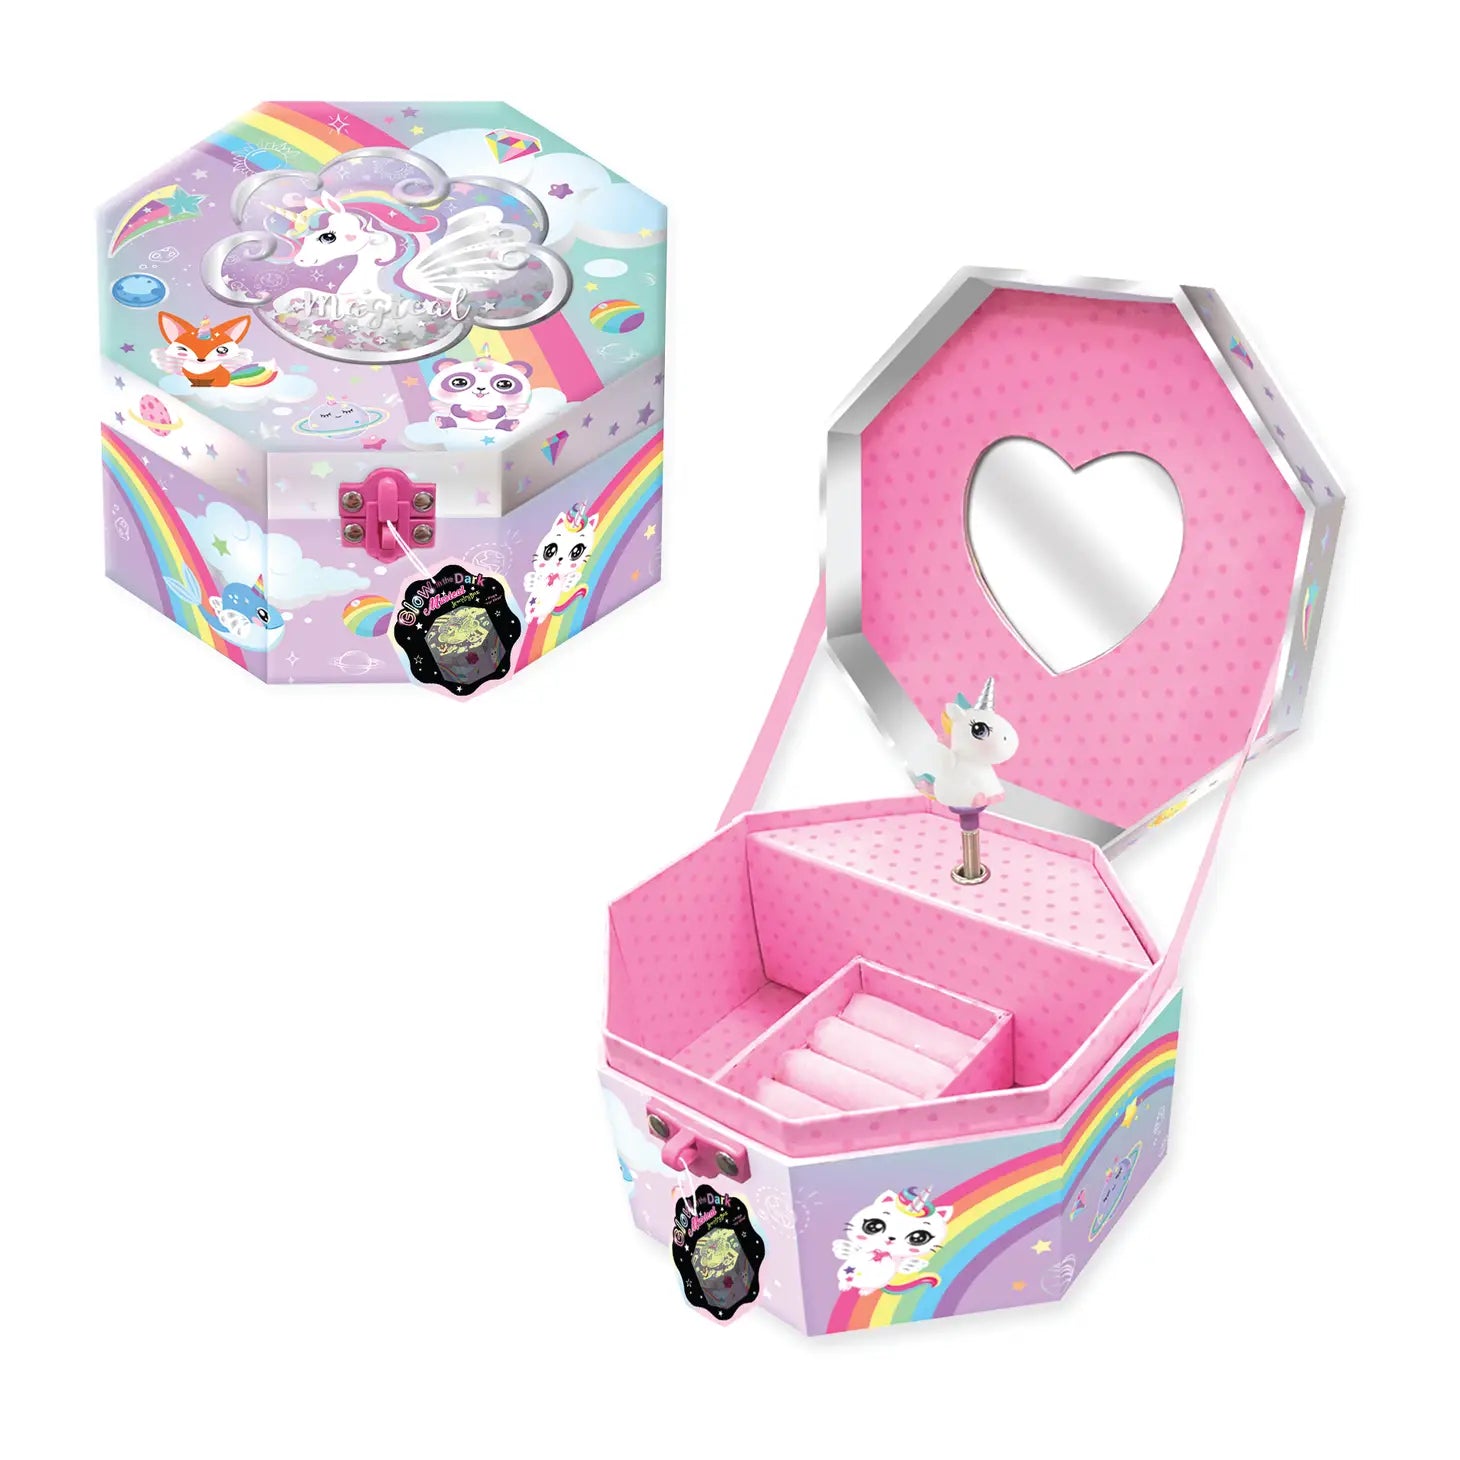 Musical Jewelry Box with Figurine, Glow in the Dark